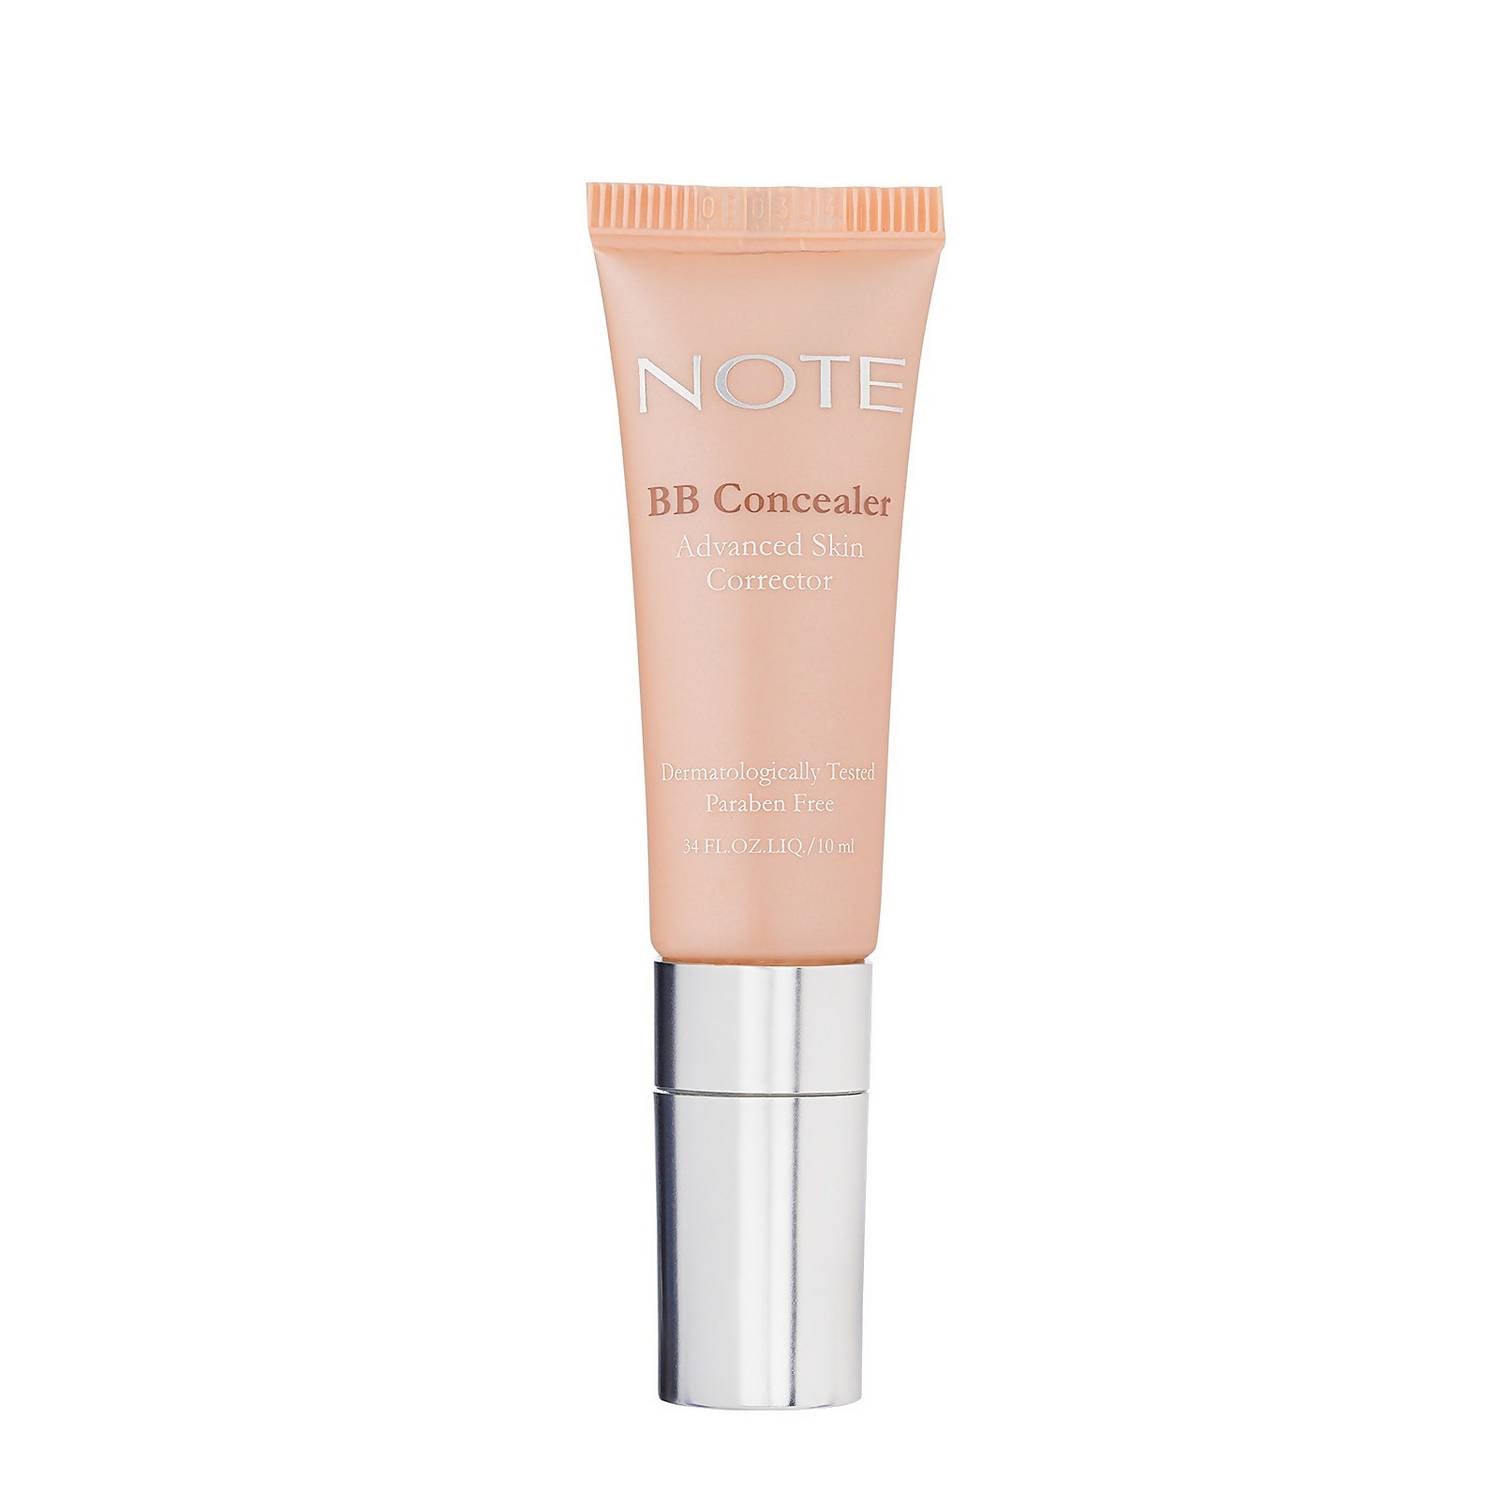 BB Concealer | Note Cosmetics - Give Us Beauty